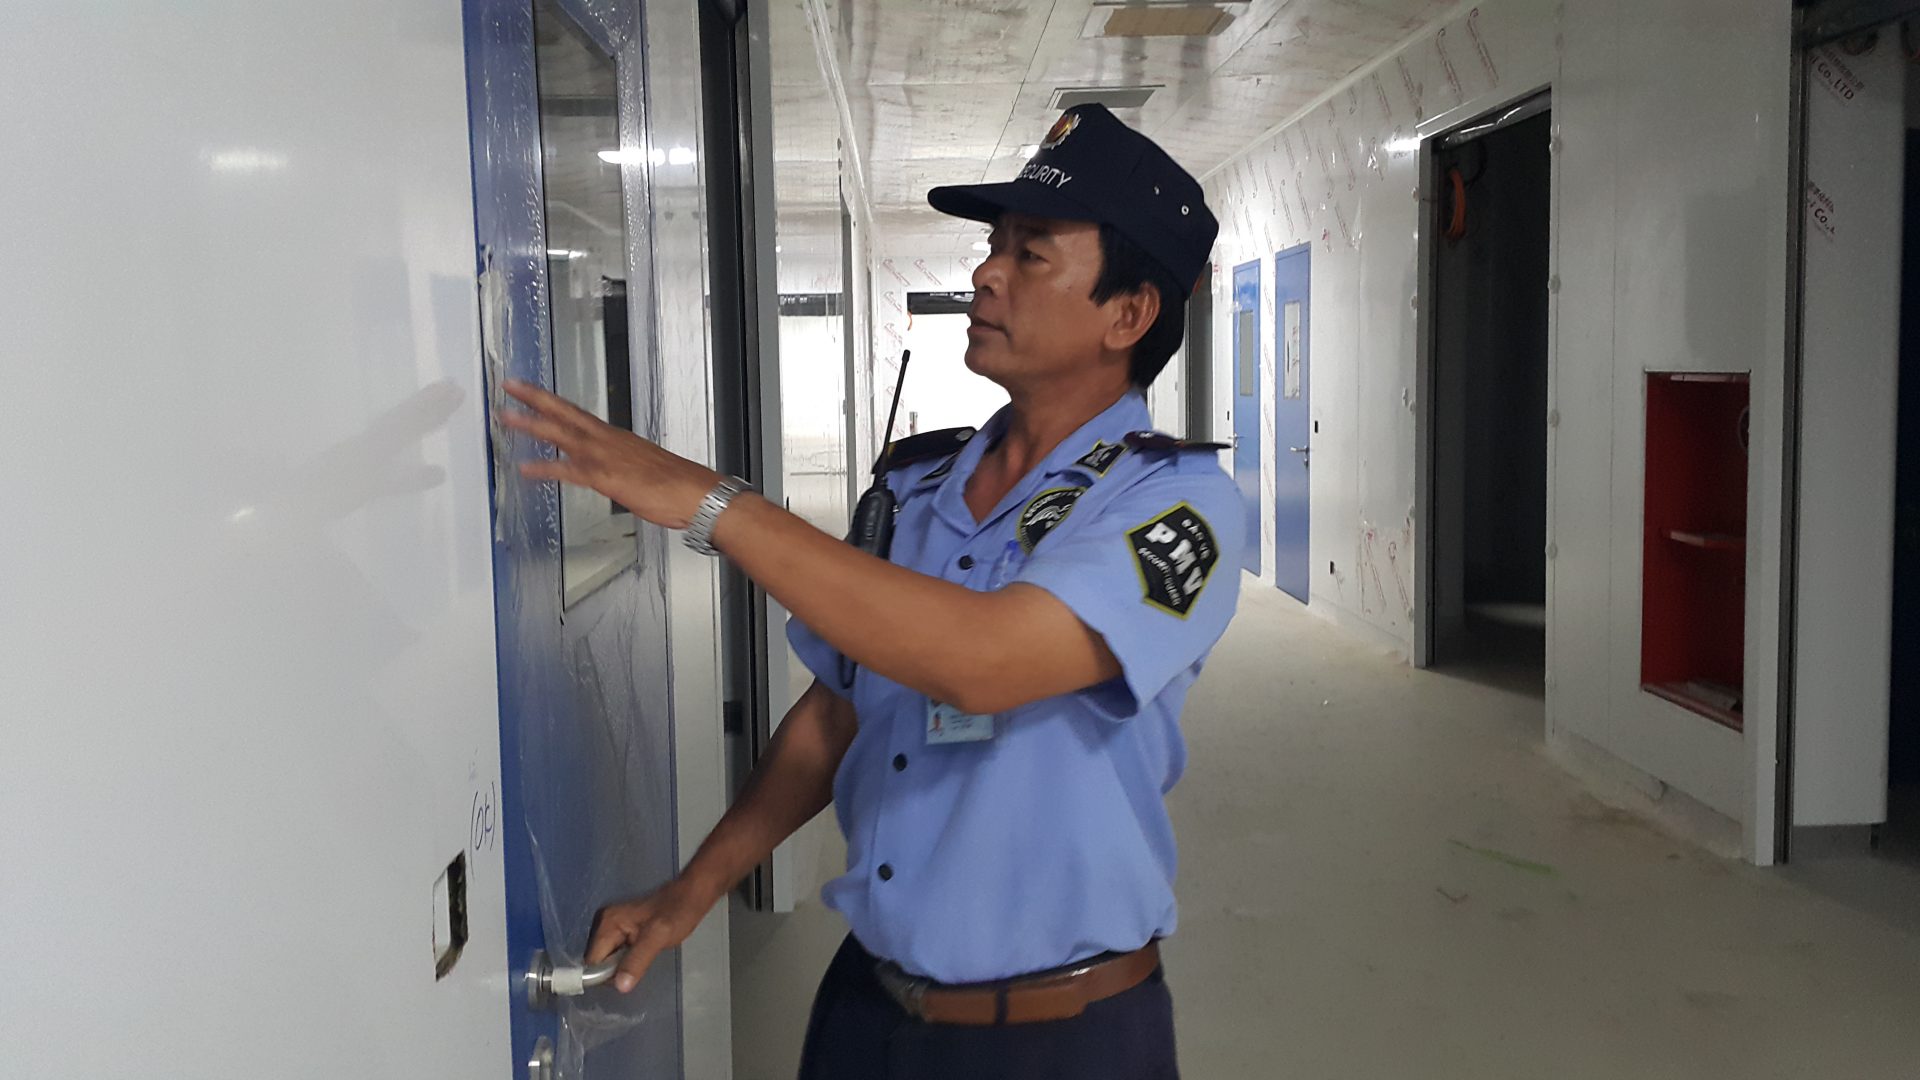 Each security guard performs a different task in the building security plan